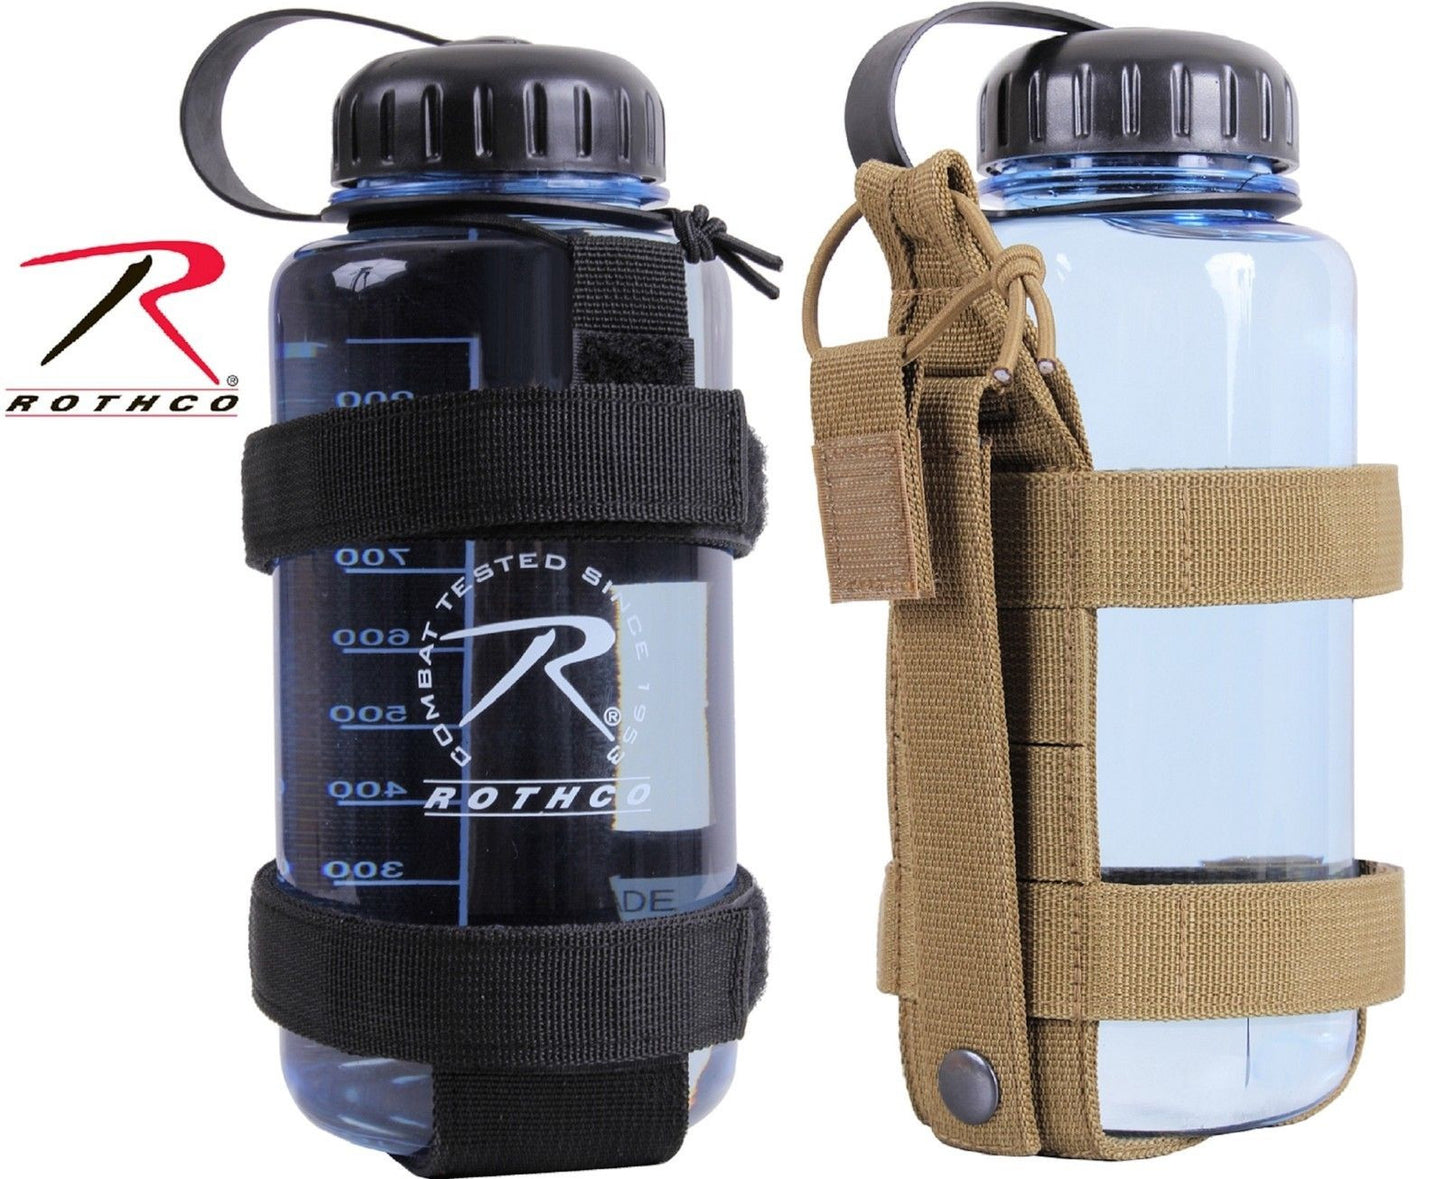 Rothco Lightweight MOLLE Bottle Carrier - Velcro-Type Water Bottle Attachment